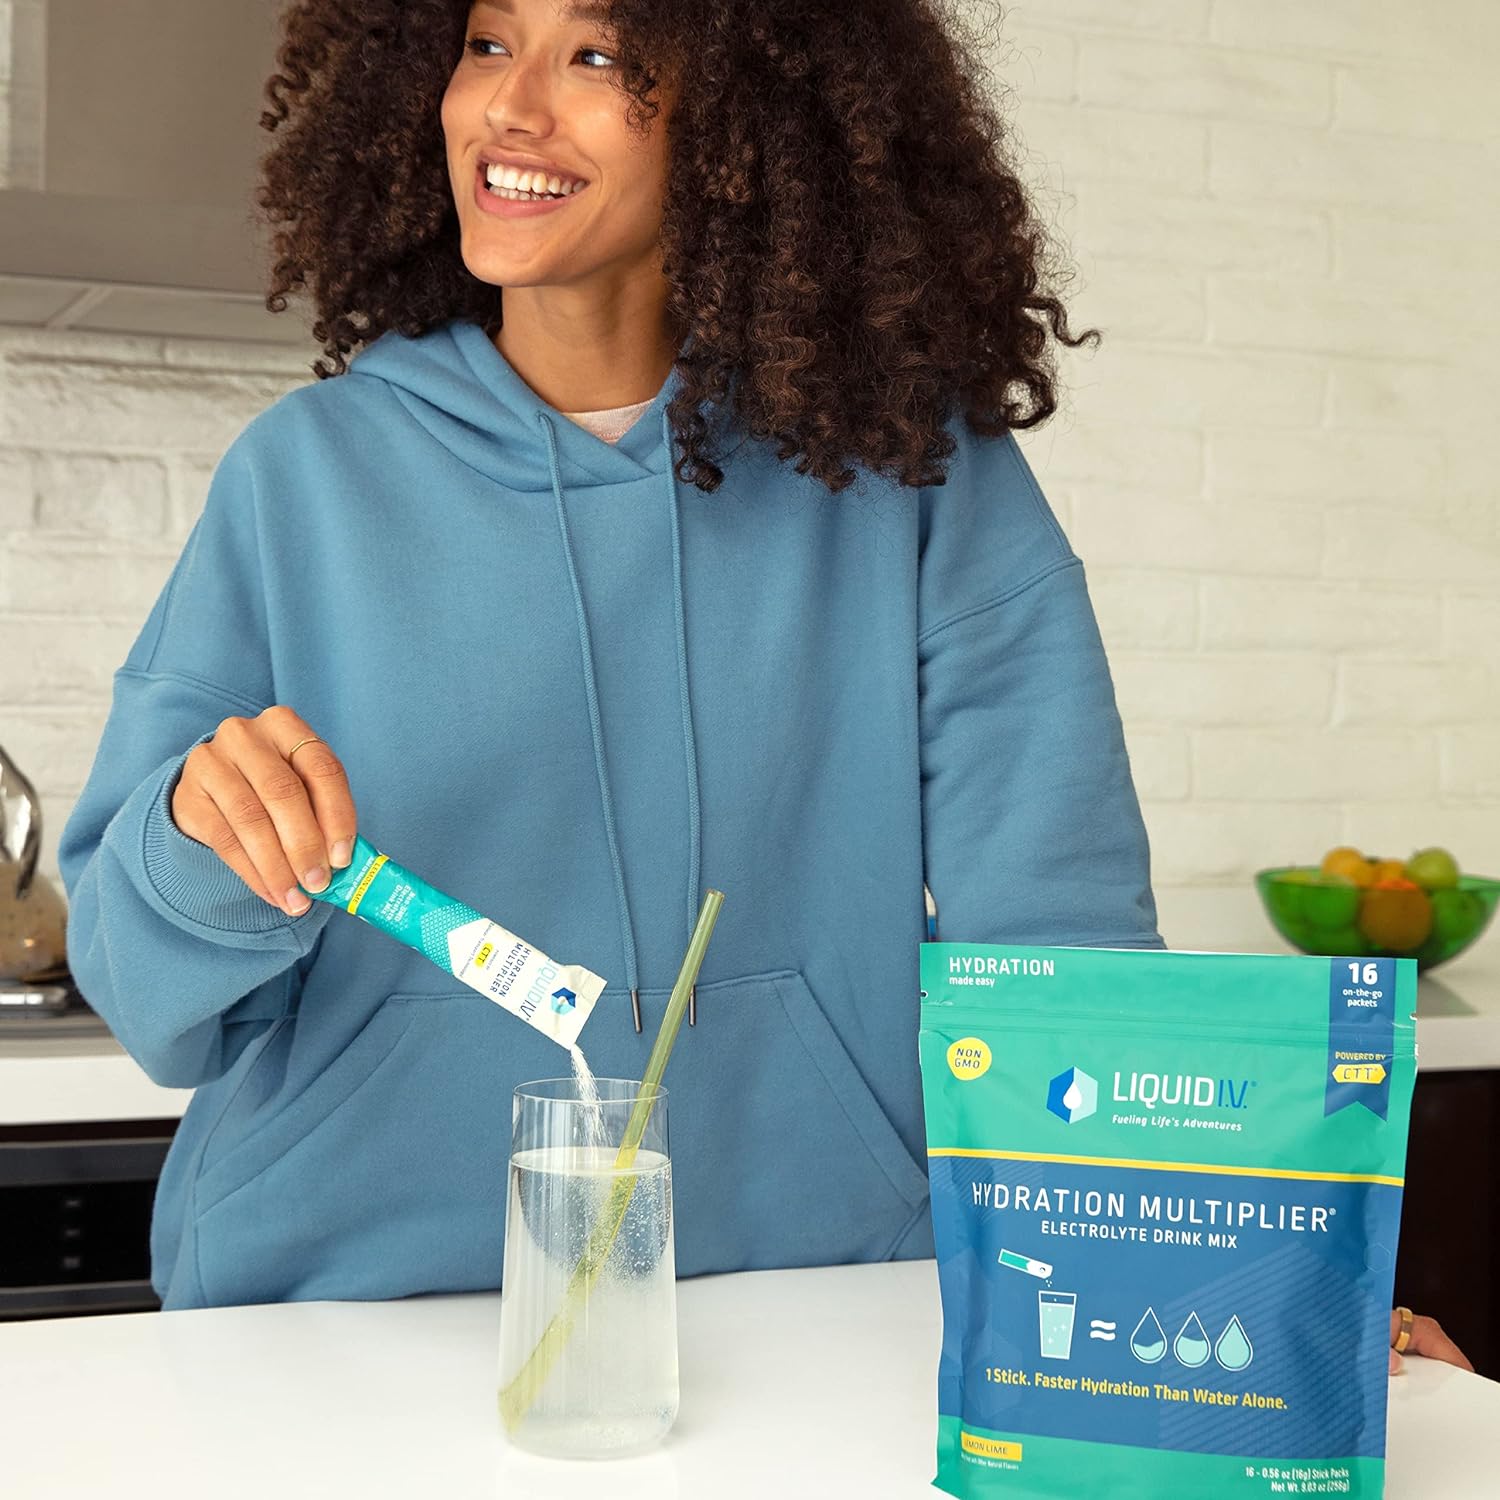 Buy Liquid I.V. Hydration Multiplier - Lemon Lime - Hydration Powder Packets | Electrolyte Powder Drink Mix | Easy Open Single-Serving Sticks | Non-GMO | 3 Pack (48 Servings) on Amazon.com ? FREE SHIPPING on qualified orders